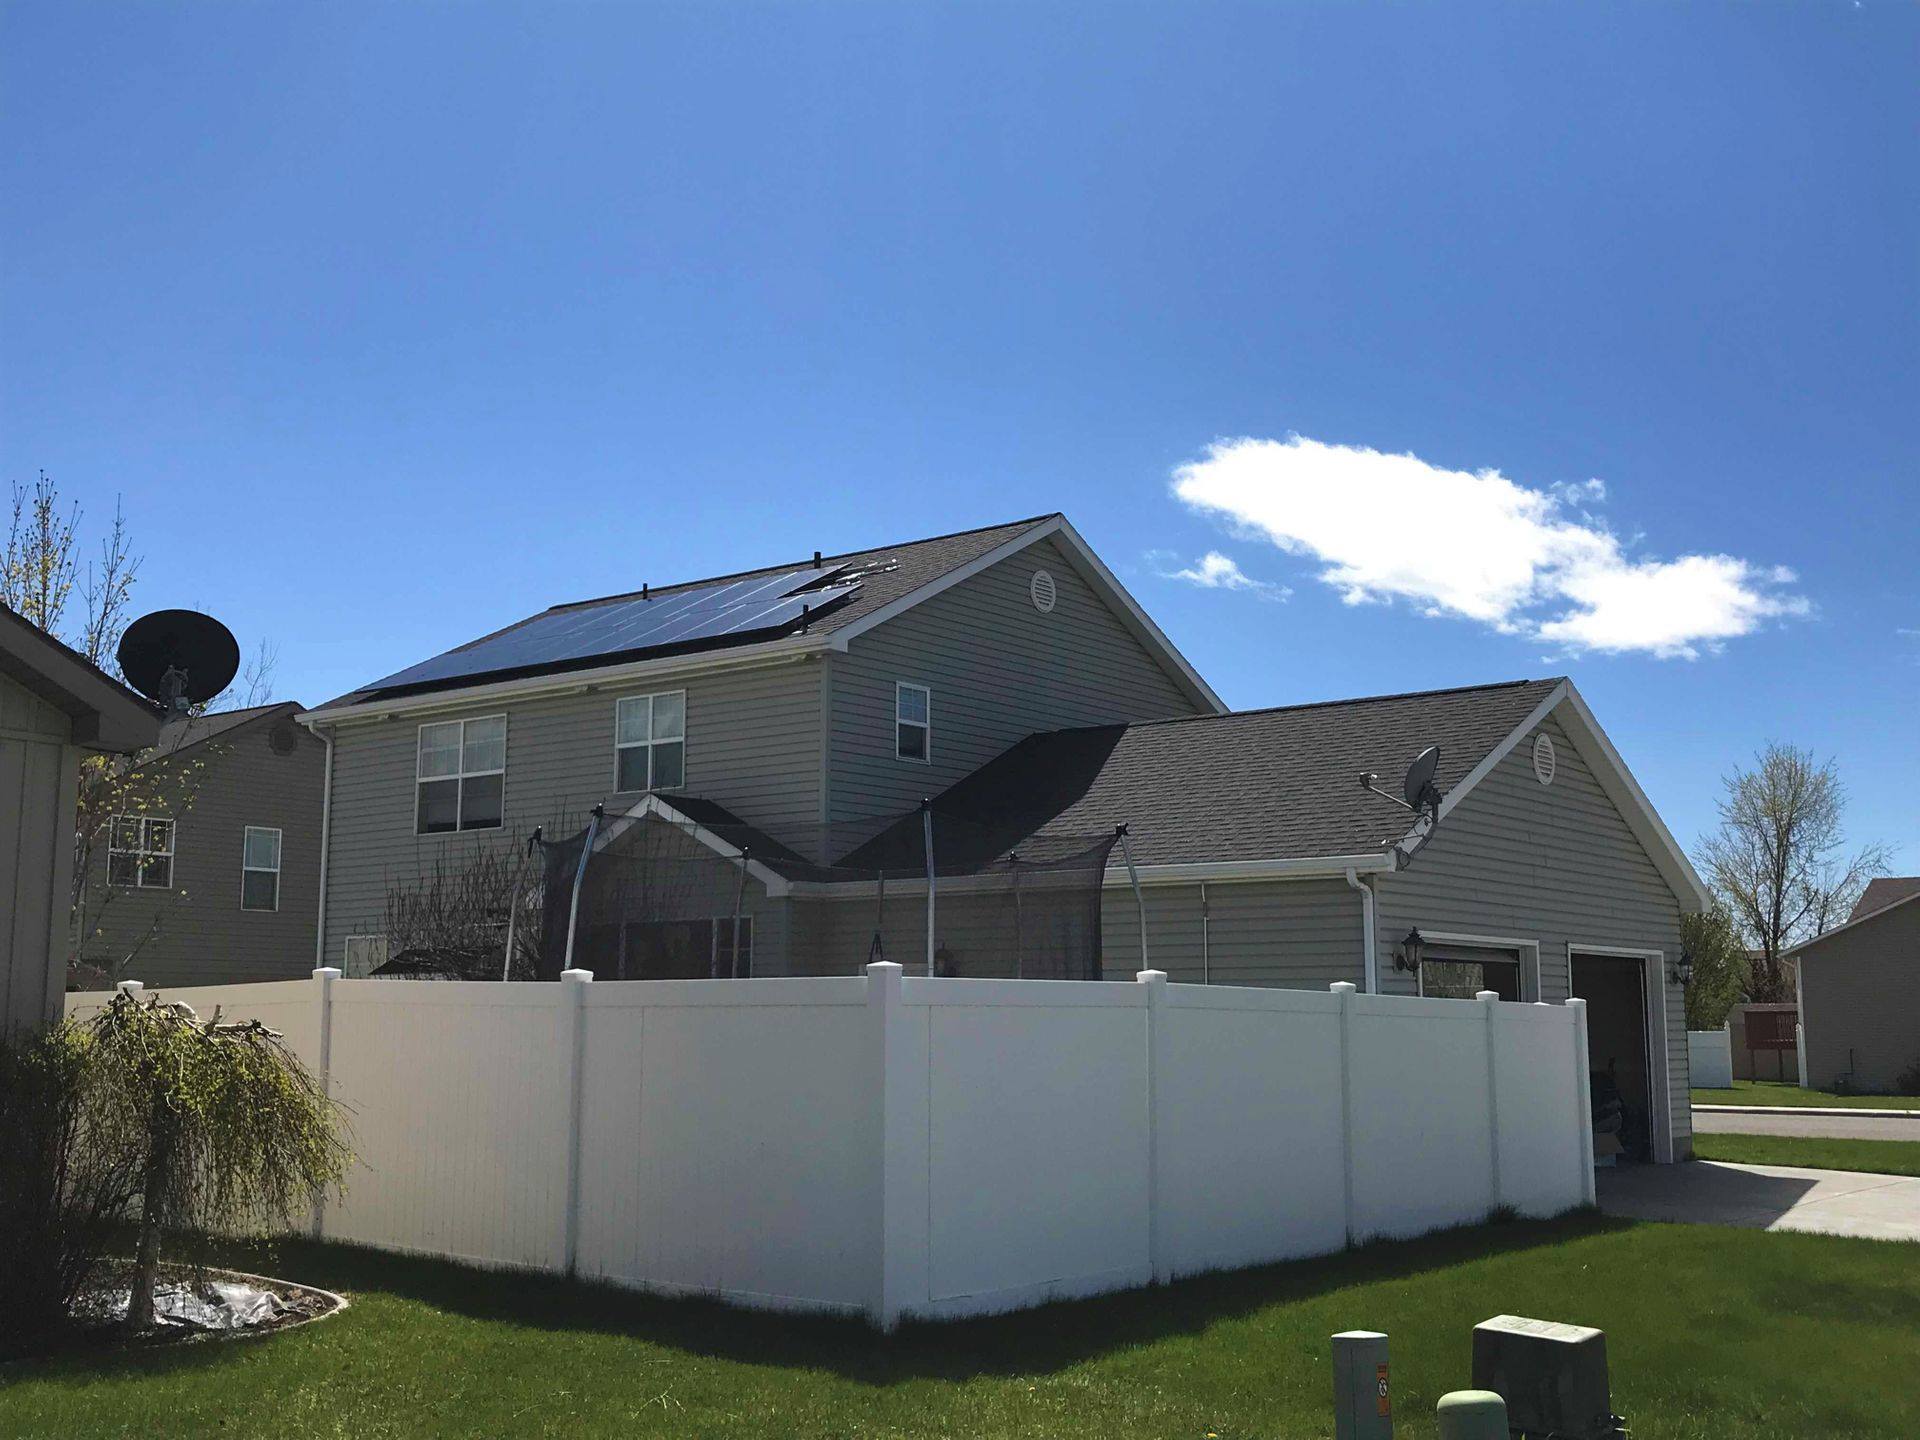 How Much Value Could Solar Add To My Property?